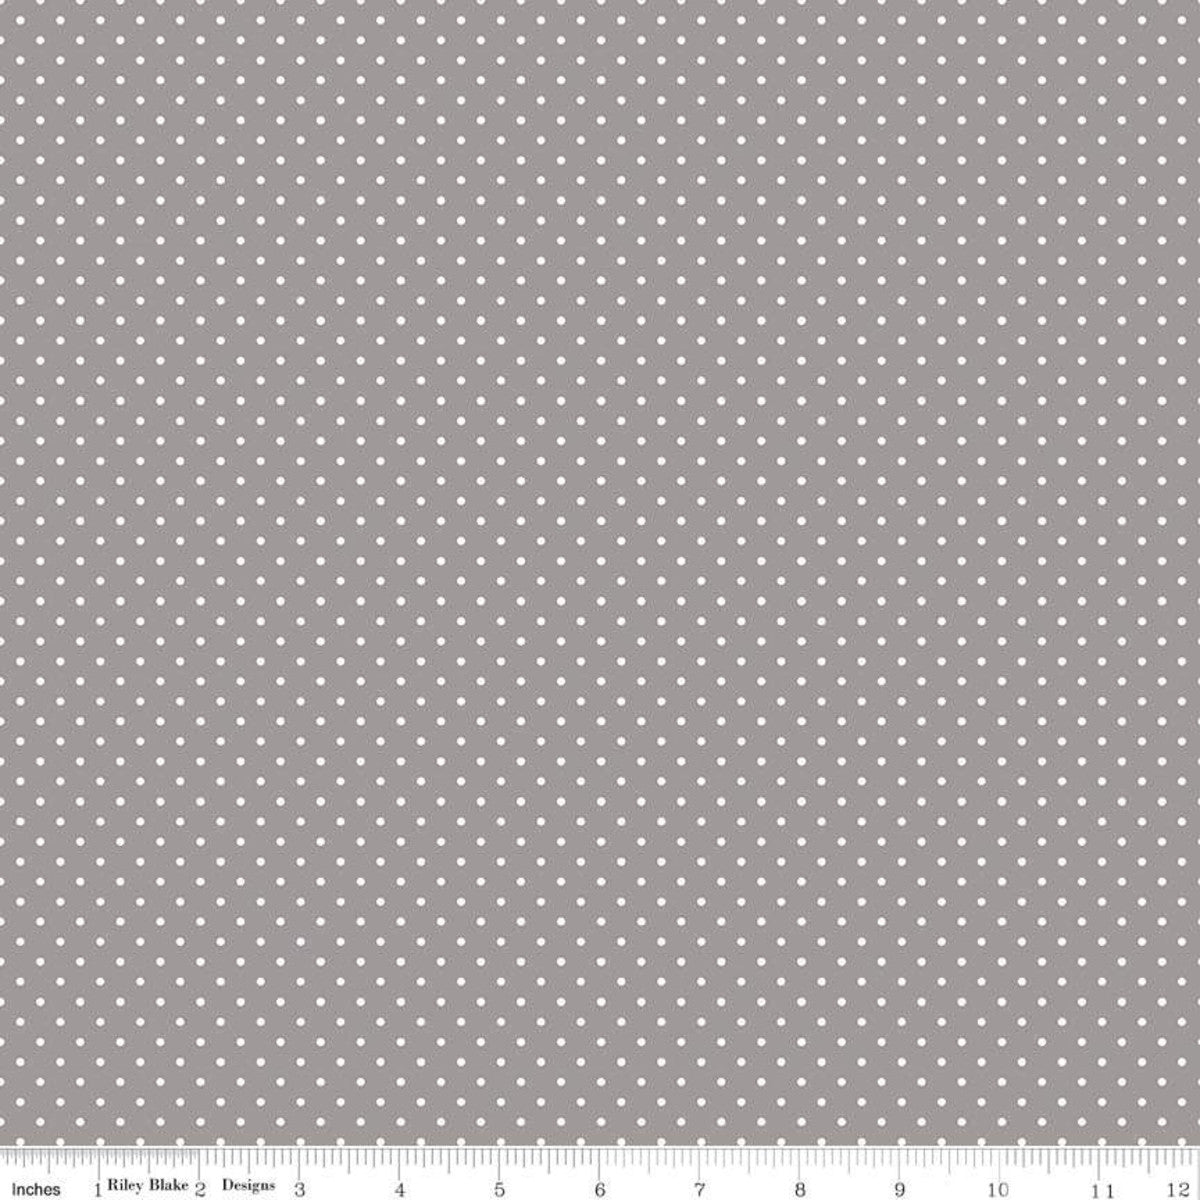 White Swiss (Polka) Dots - Gray Background Fabric, 100% Cotton, Ref. C670-40 GRAY, Swiss Dots Collection by Riley Blake Designs®